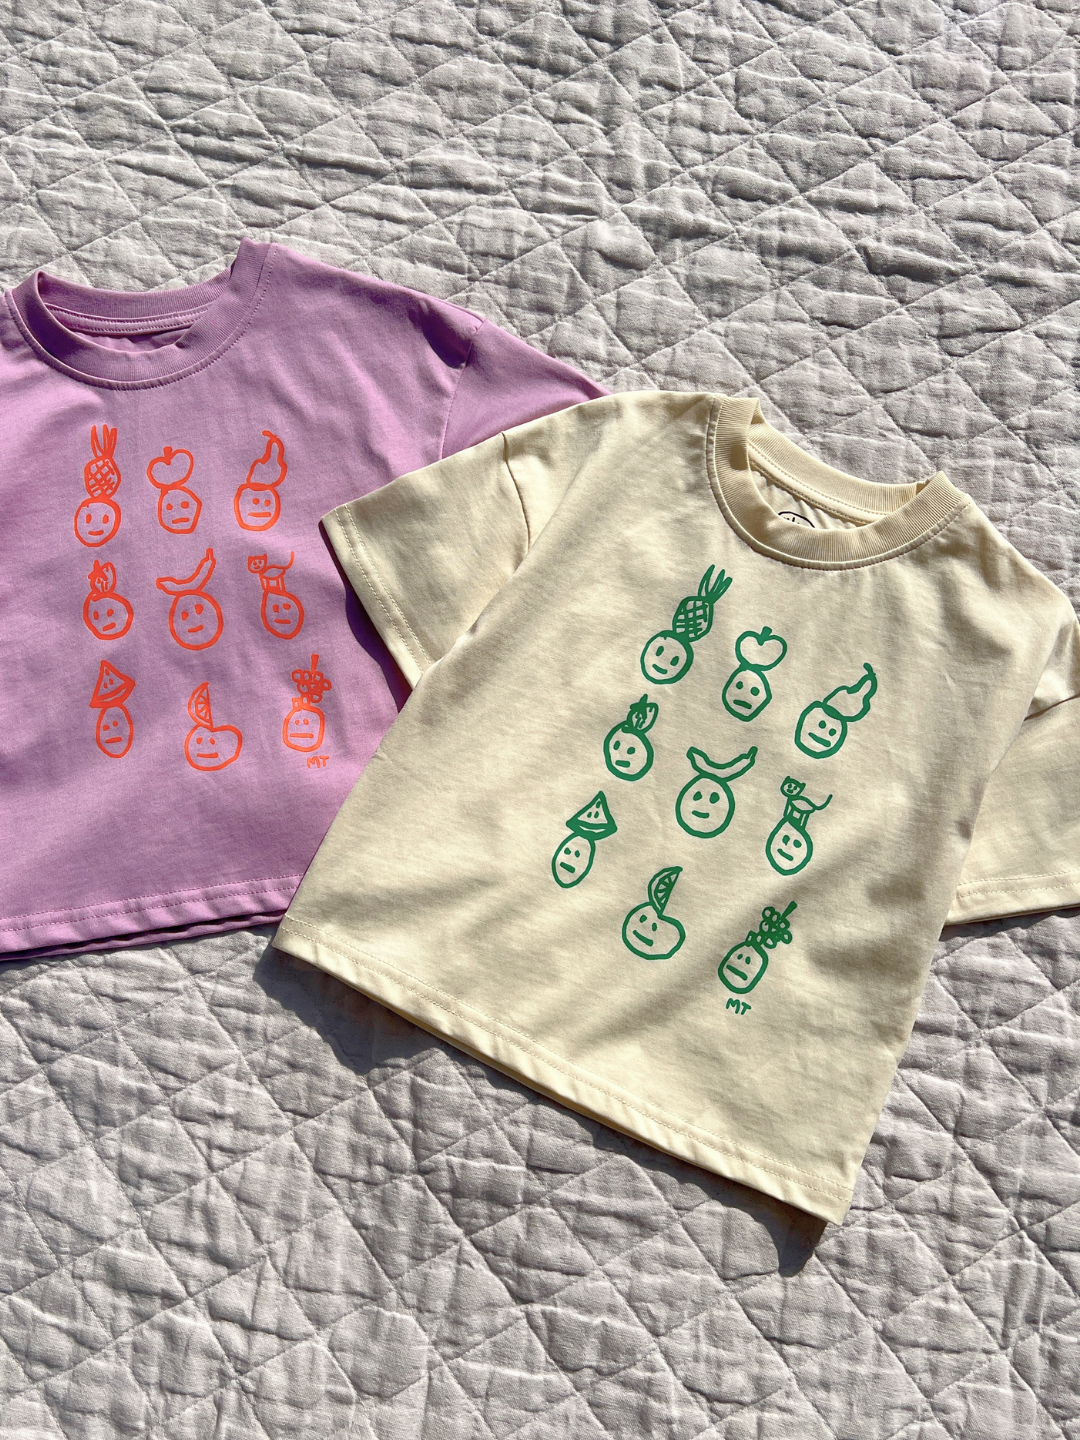 Both colorways of the Fruit Face tee are laid flat on the quilt in the sun.